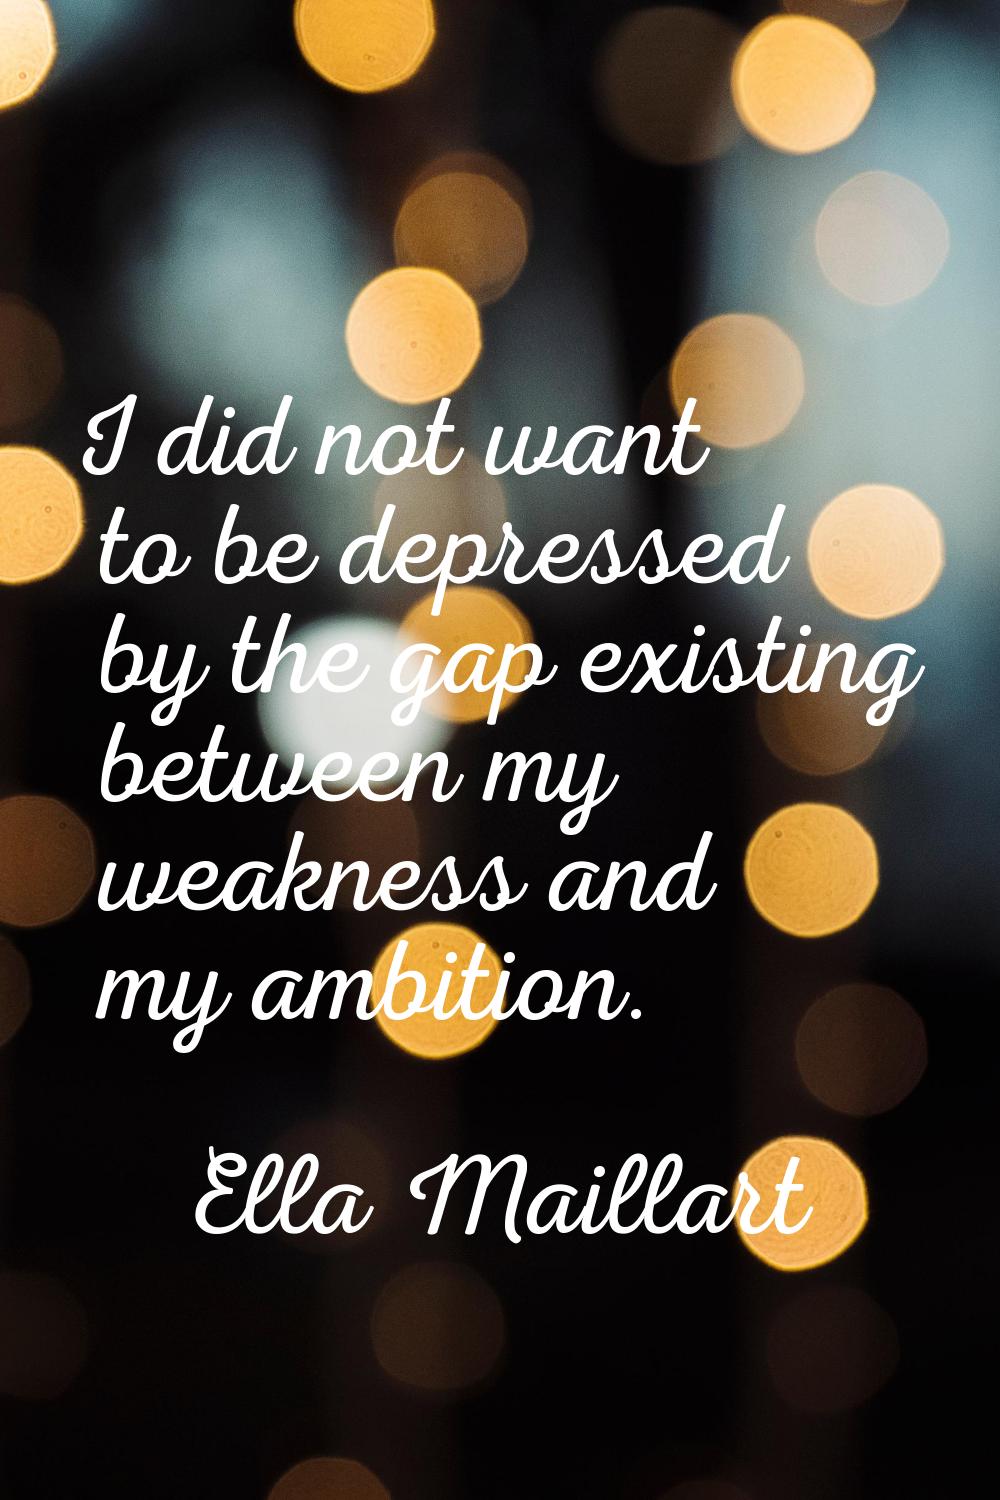 I did not want to be depressed by the gap existing between my weakness and my ambition.